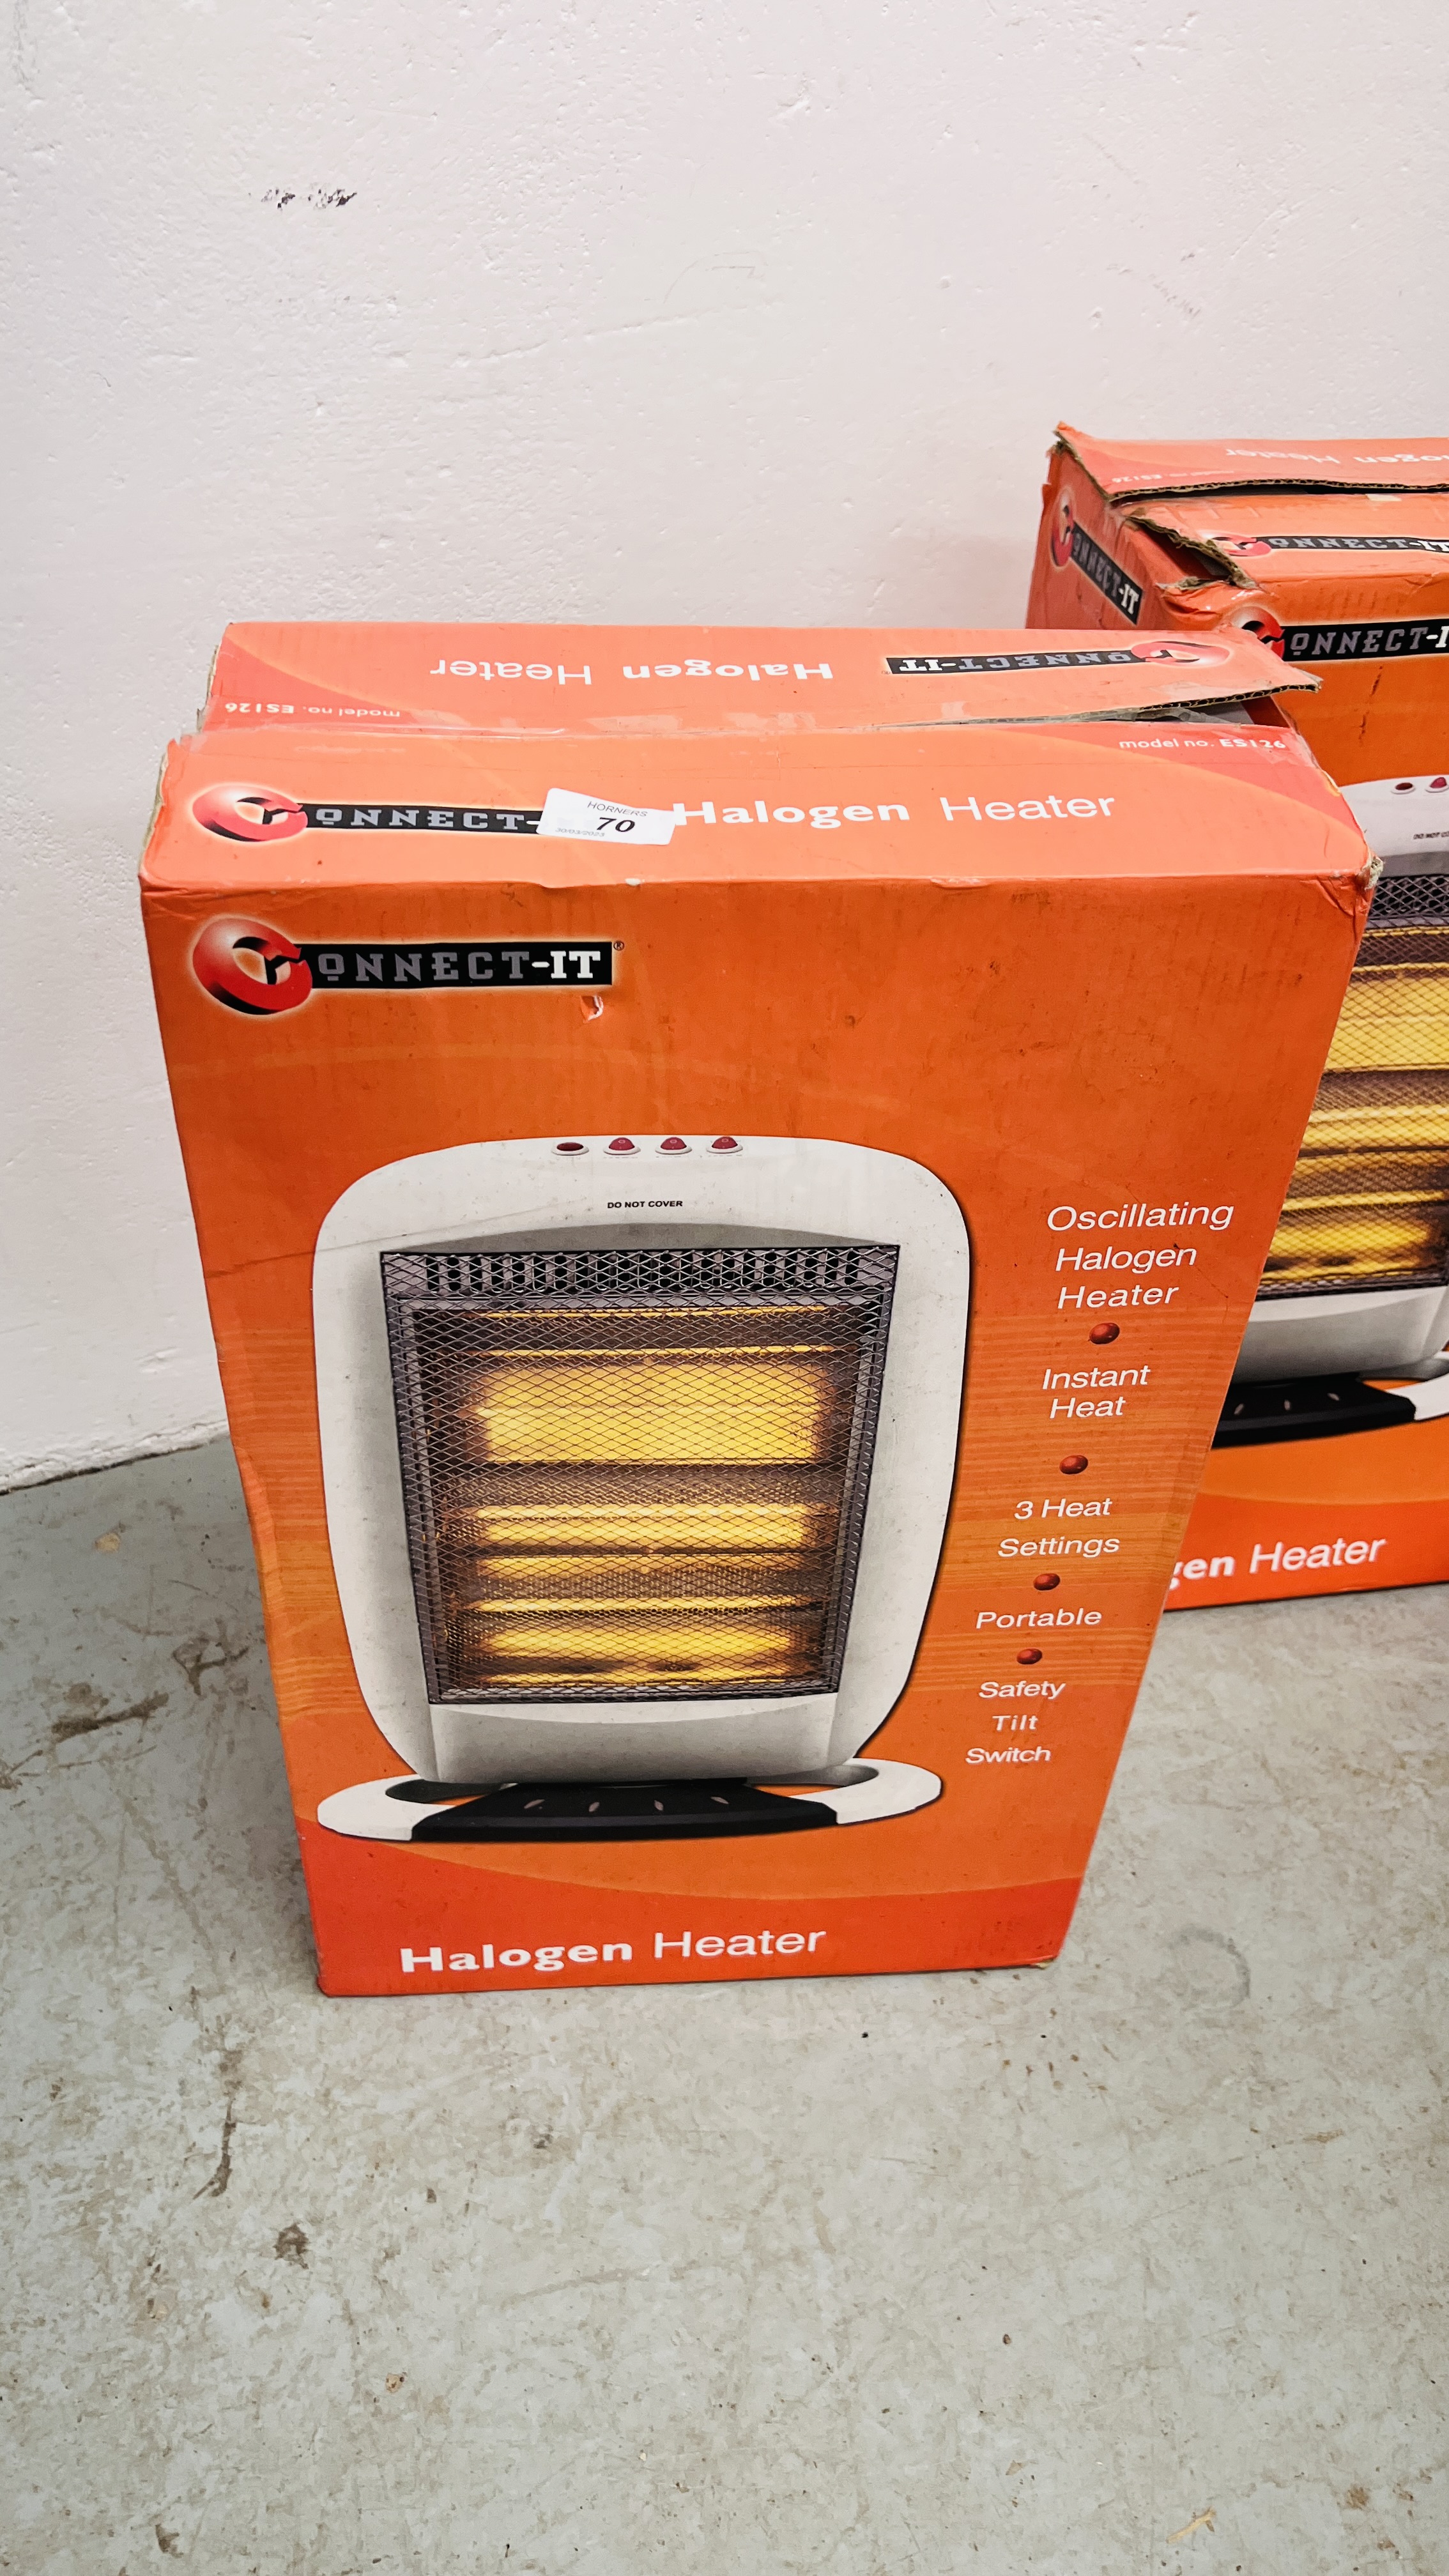 TWO BOXED CONNECT-IT HALOGEN HEATERS - SOLD AS SEEN. - Image 2 of 5